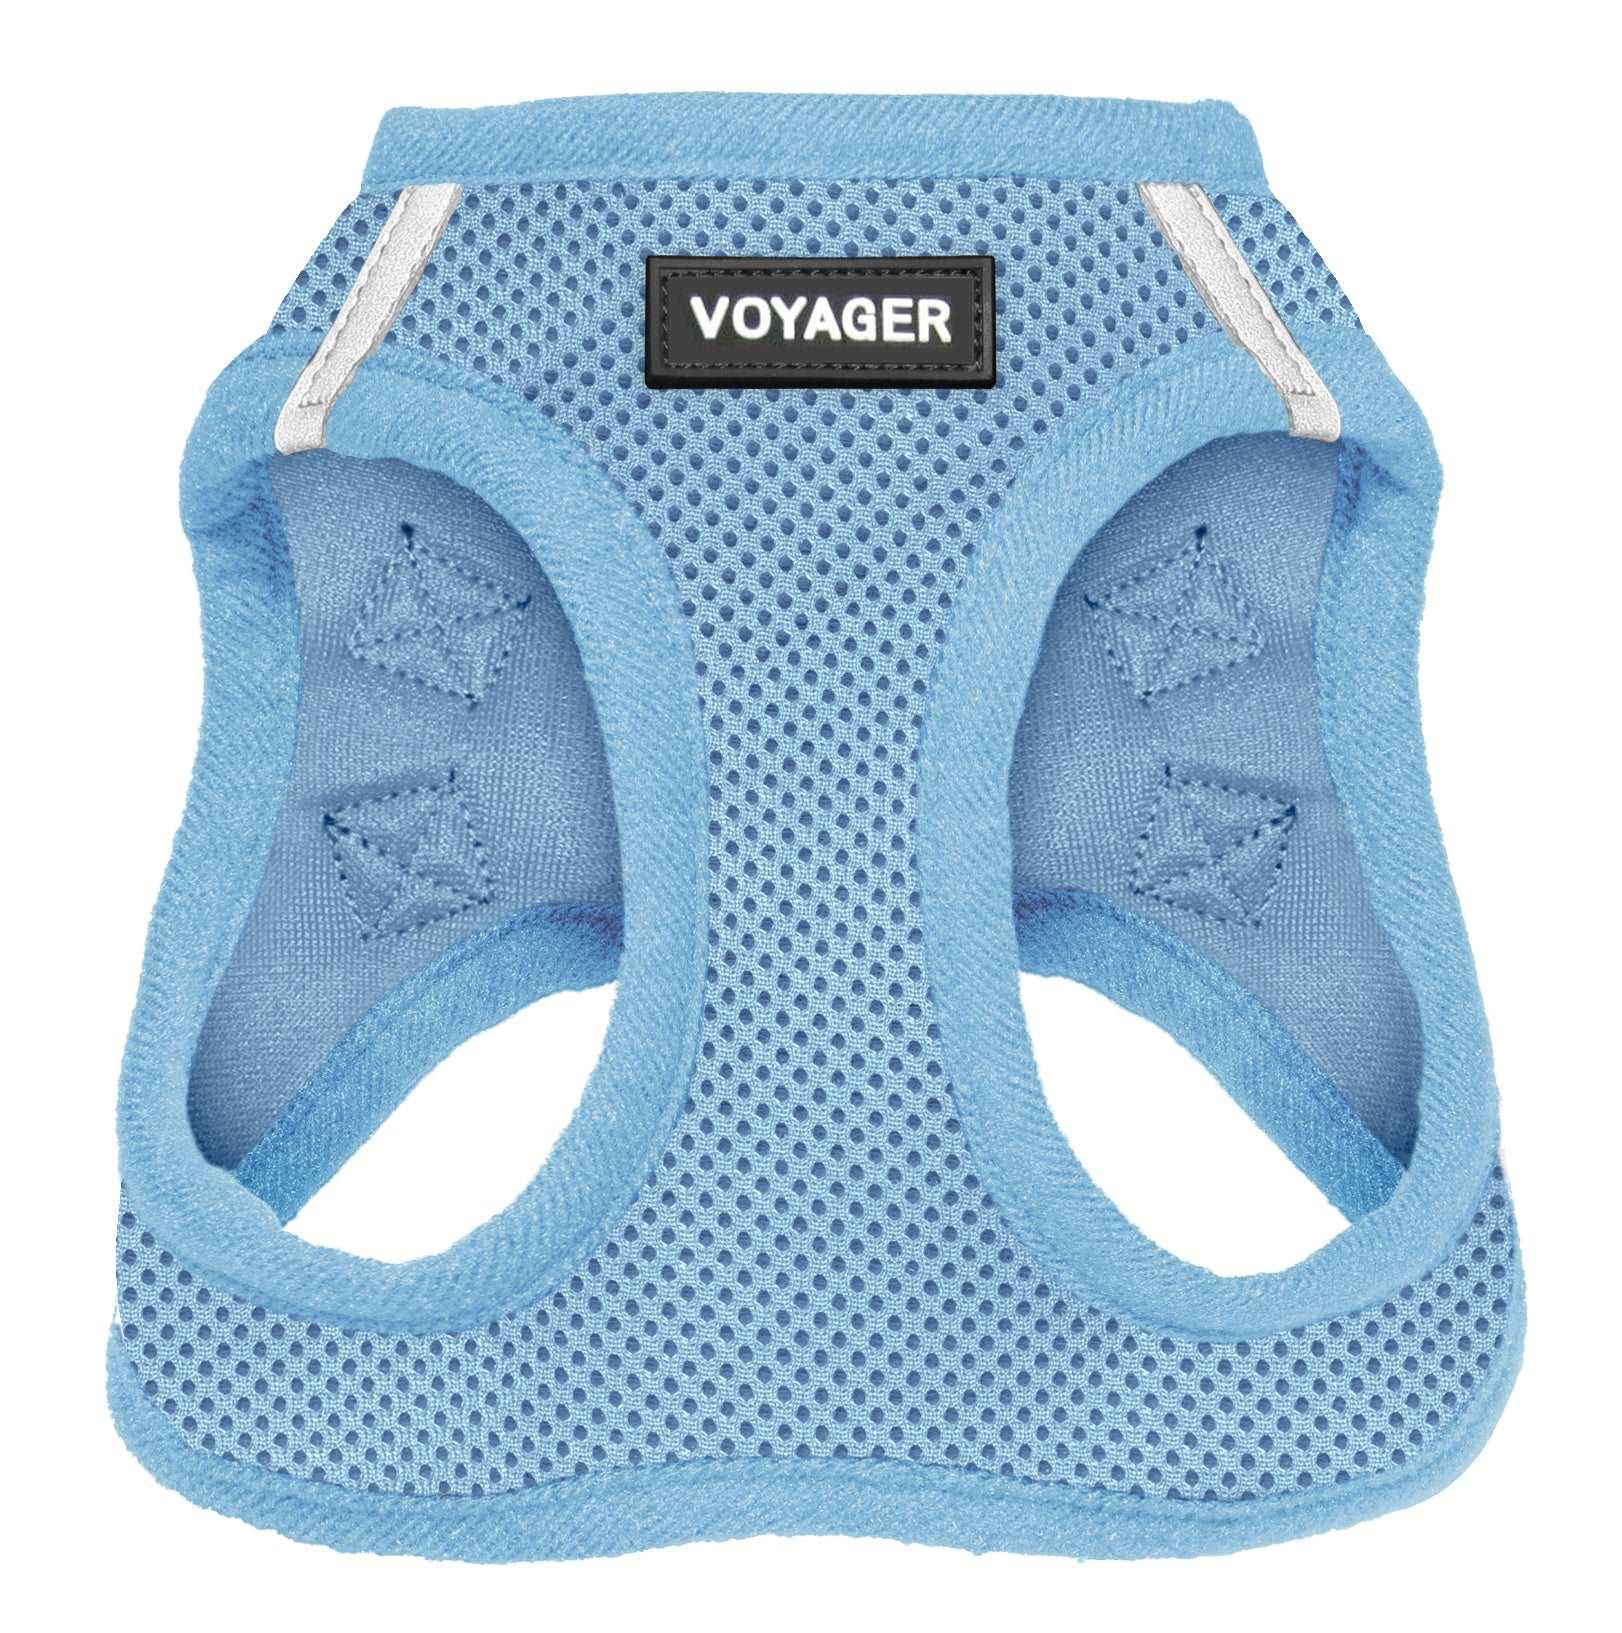 VOYAGER Step-In Air Pet Harness in Baby Blue with Matching Trim and Webbing - Front